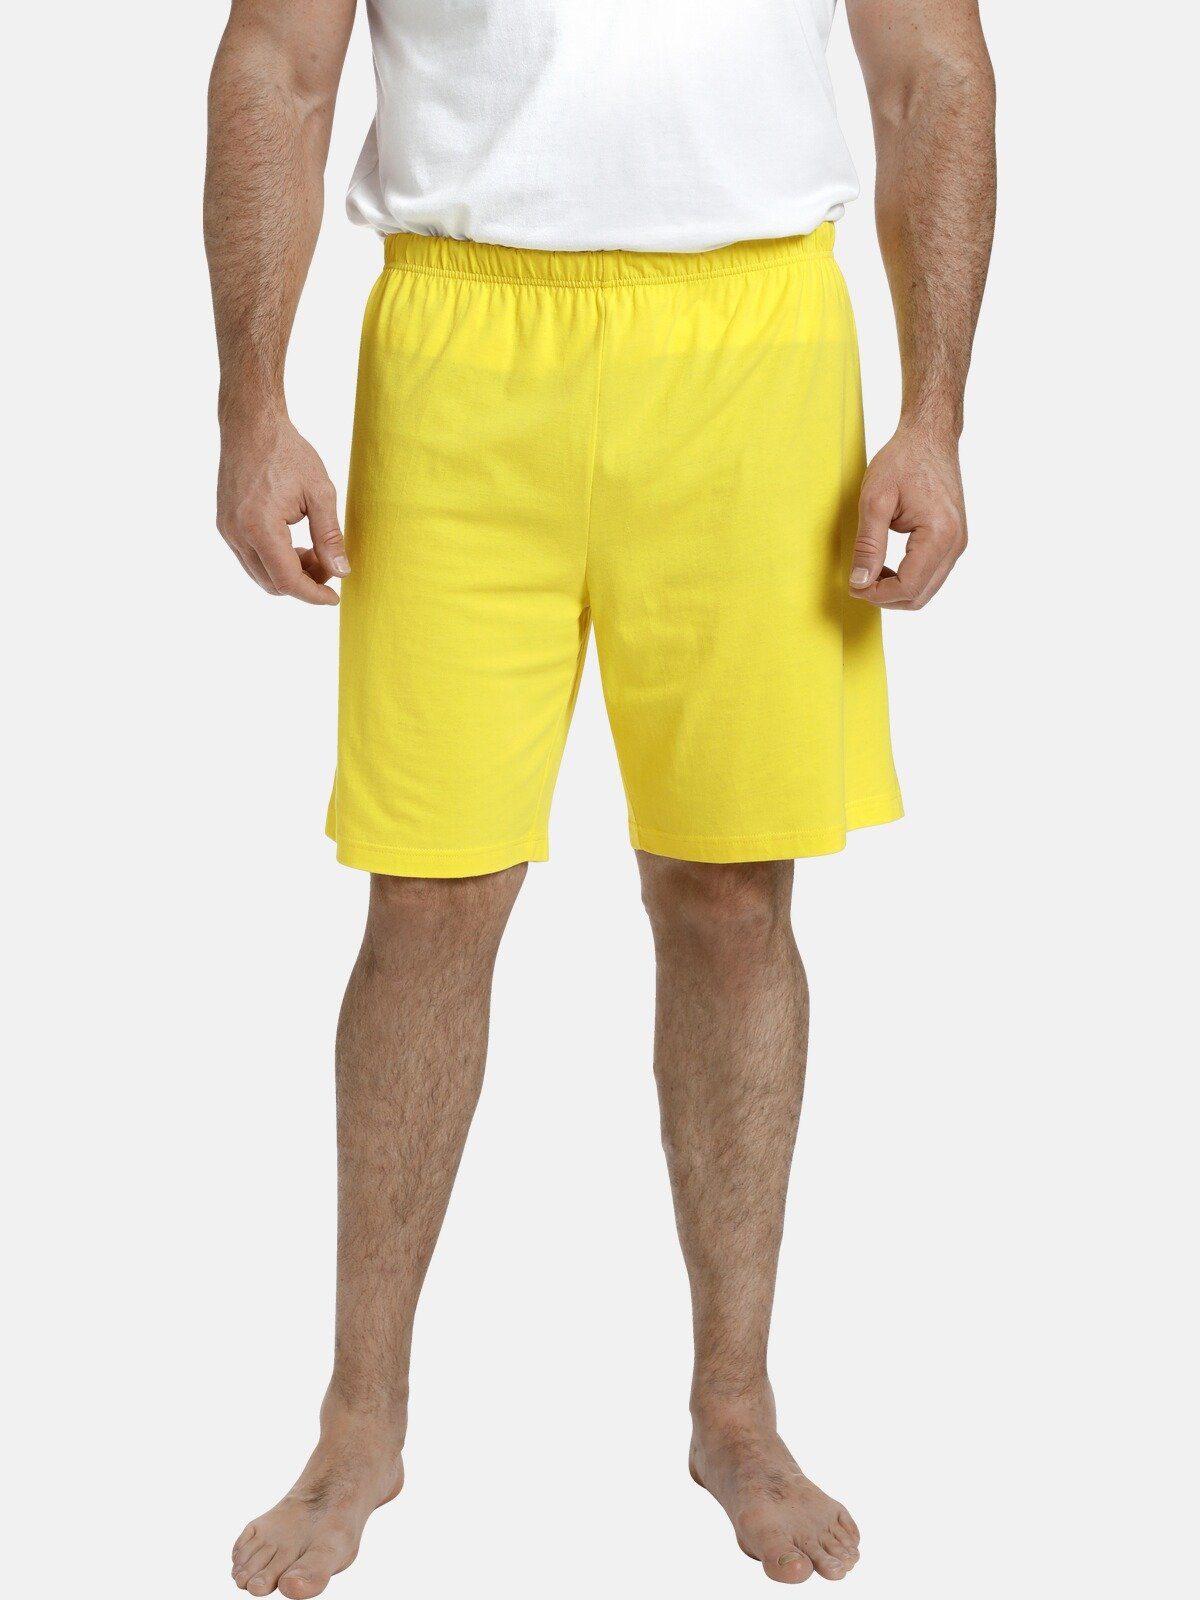 Charles Colby Schlafhose LORD MYCROFT leichte bequeme Relaxshorts gelb